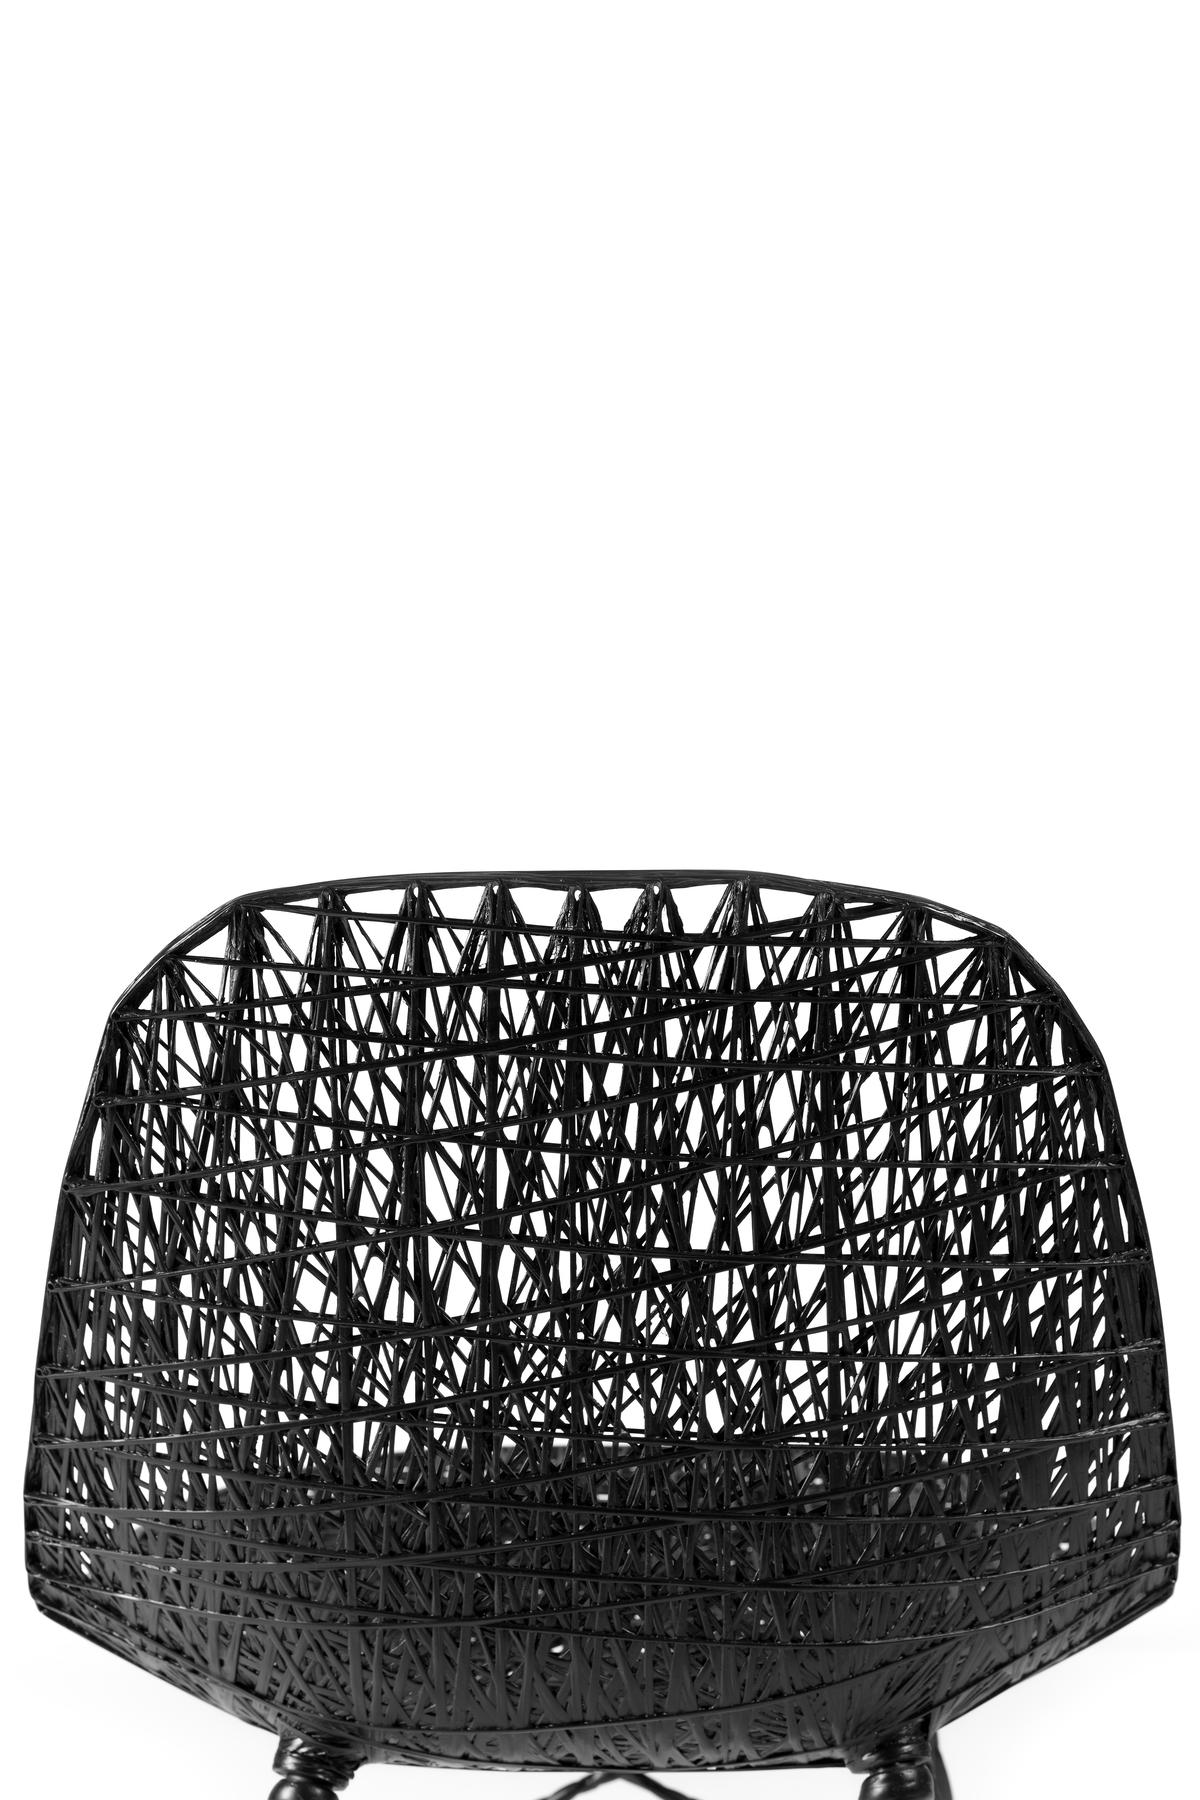 Moooi Carbon Chair in Black Fiber with Epoxy Resin by Bertjan Pot For Sale 2